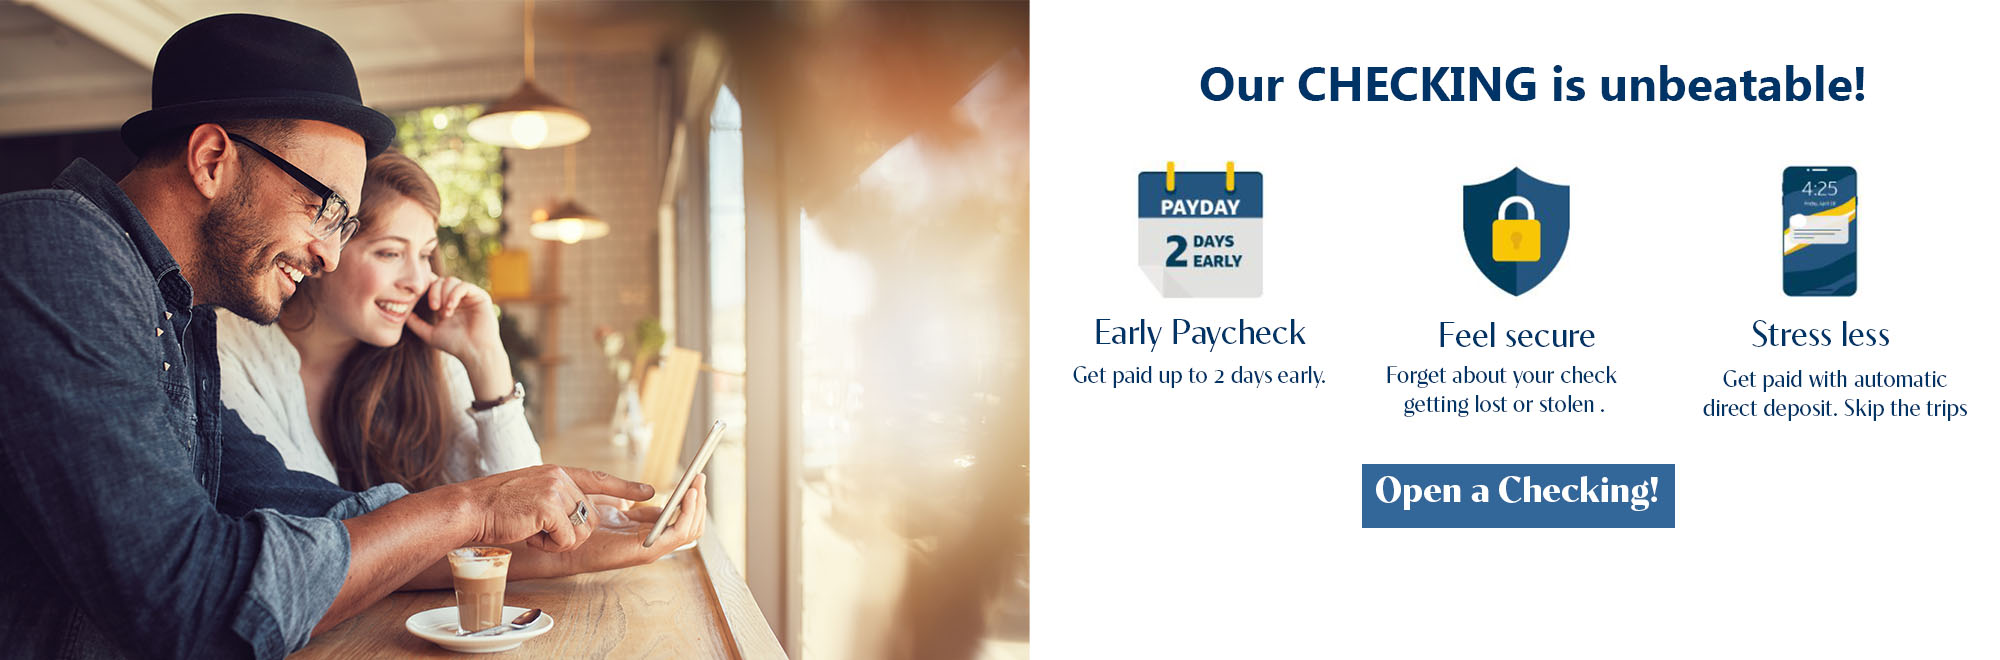 Our checking is unbeatable. Get paid up to 2 days early. Forget about your check getting lost or stolen. Get paid with automatic direct deposit. Open a Checking!